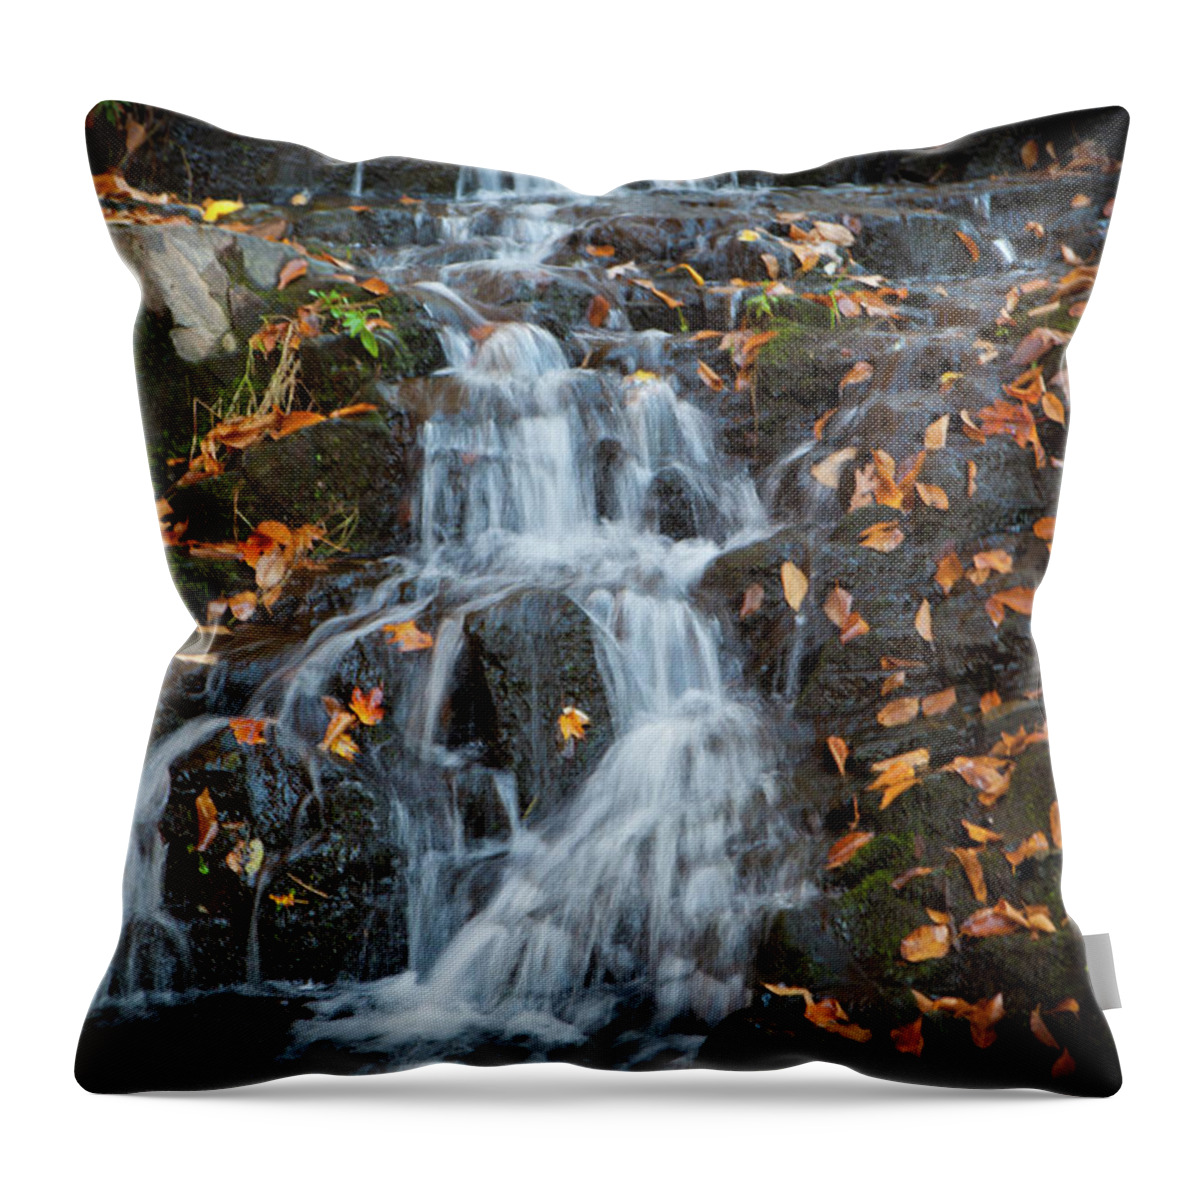 Falls Throw Pillow featuring the photograph Winter Falls_5132 by Rocco Leone